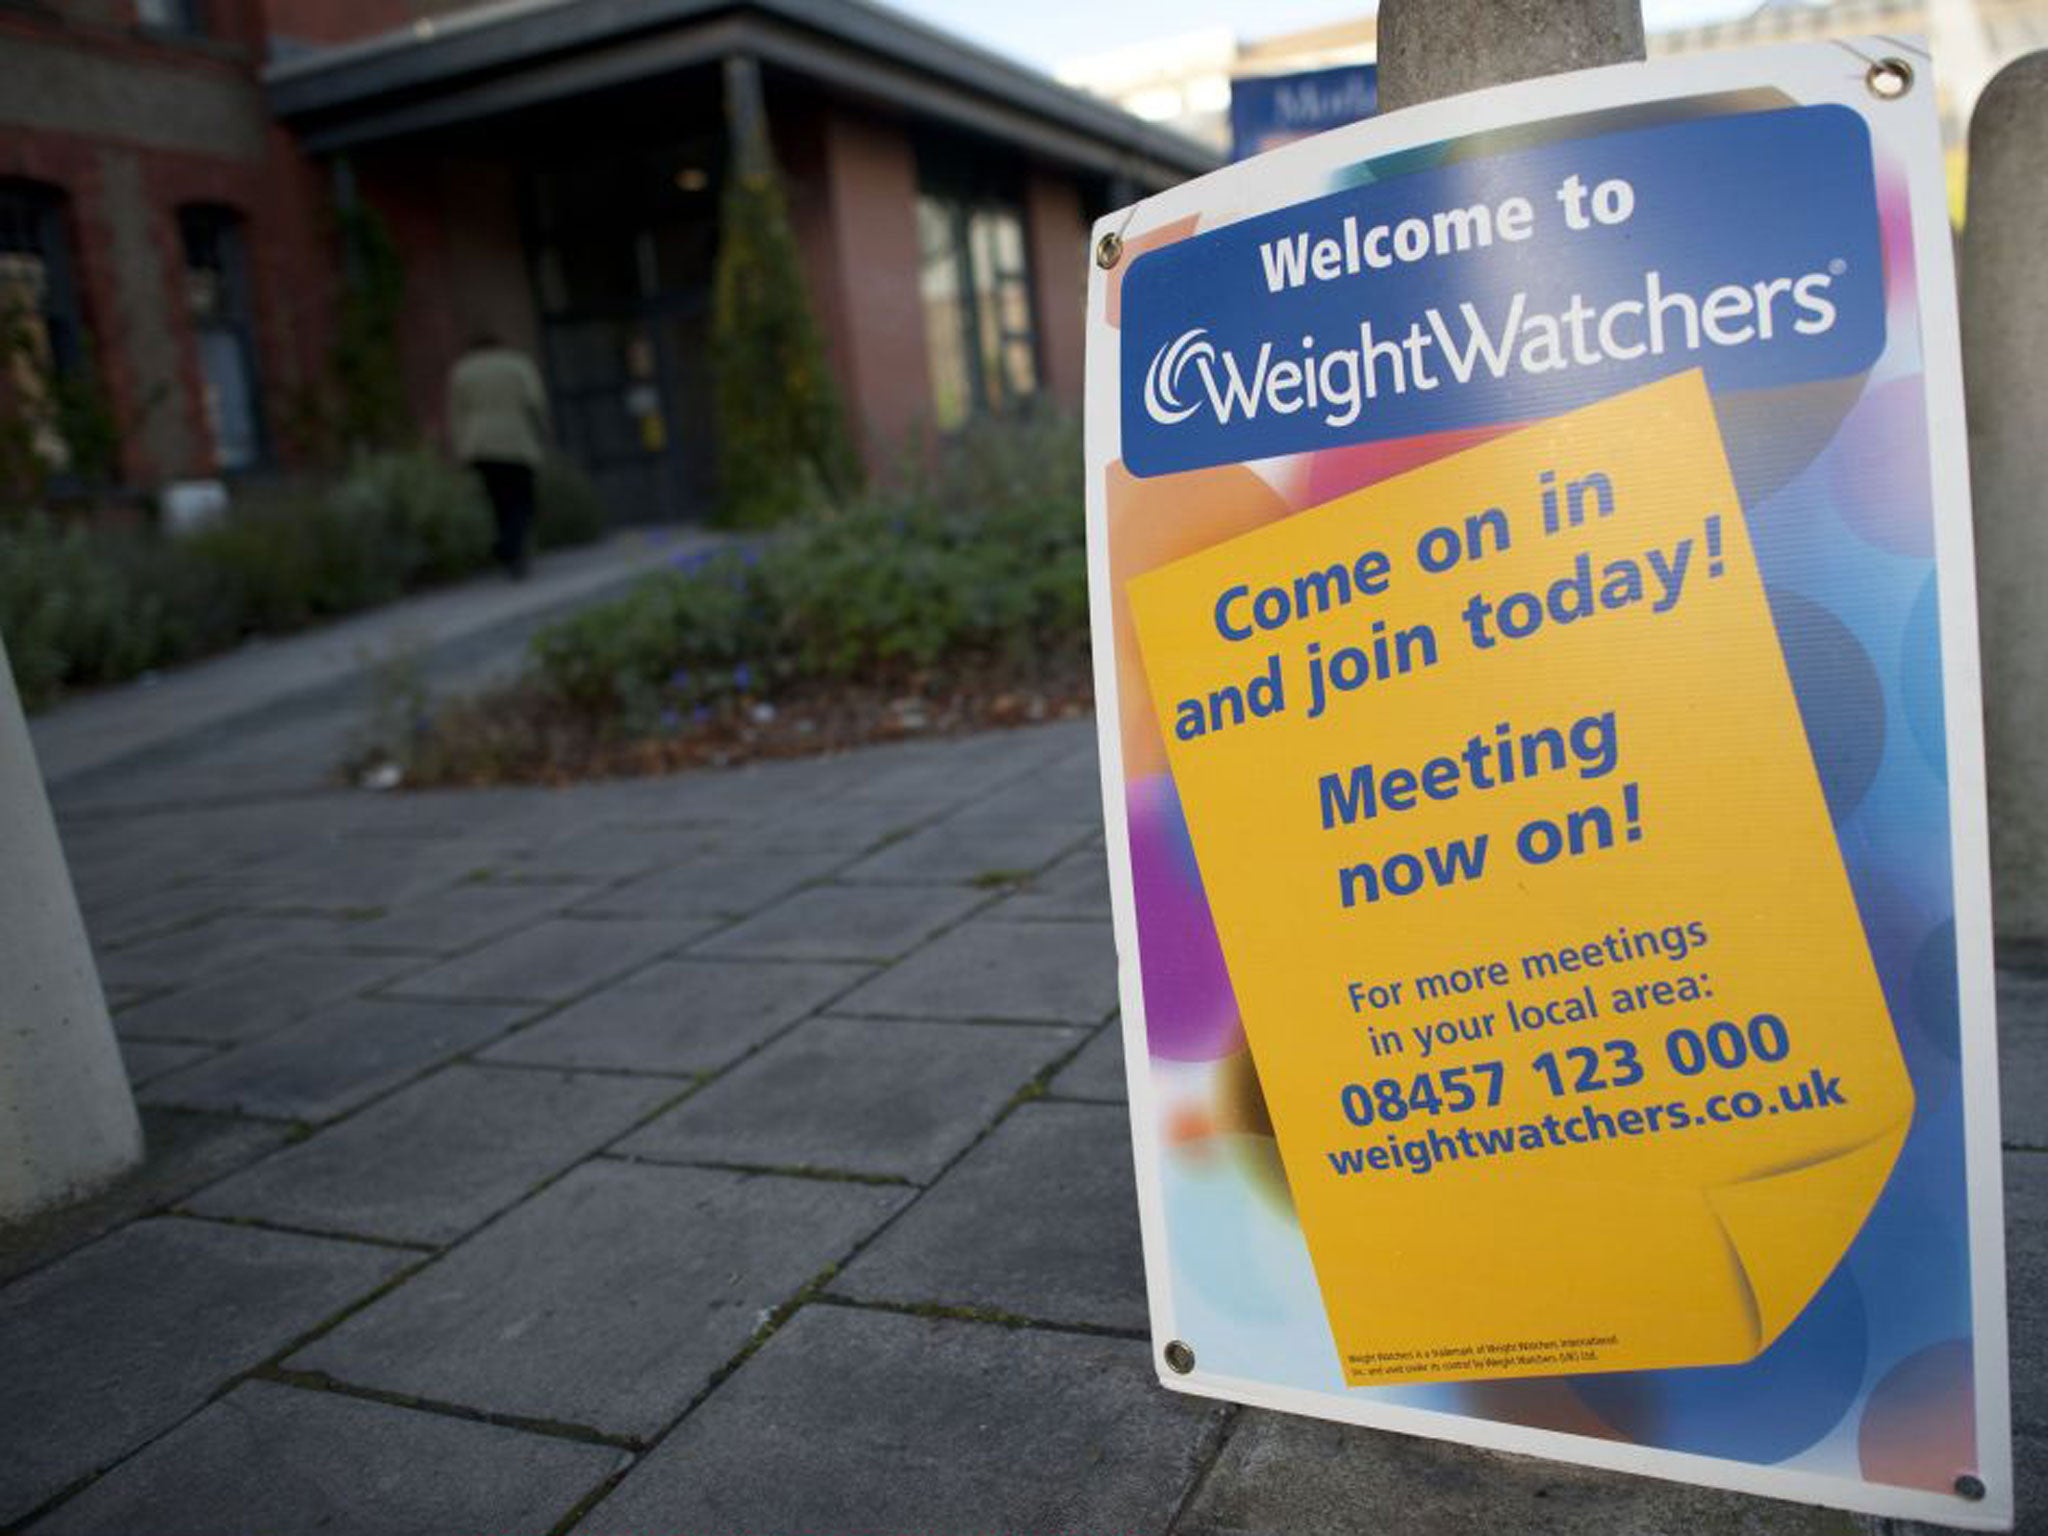 Weight Watchers claims to have a “50-year
successful track record of delivering multicomponent
weight management services”